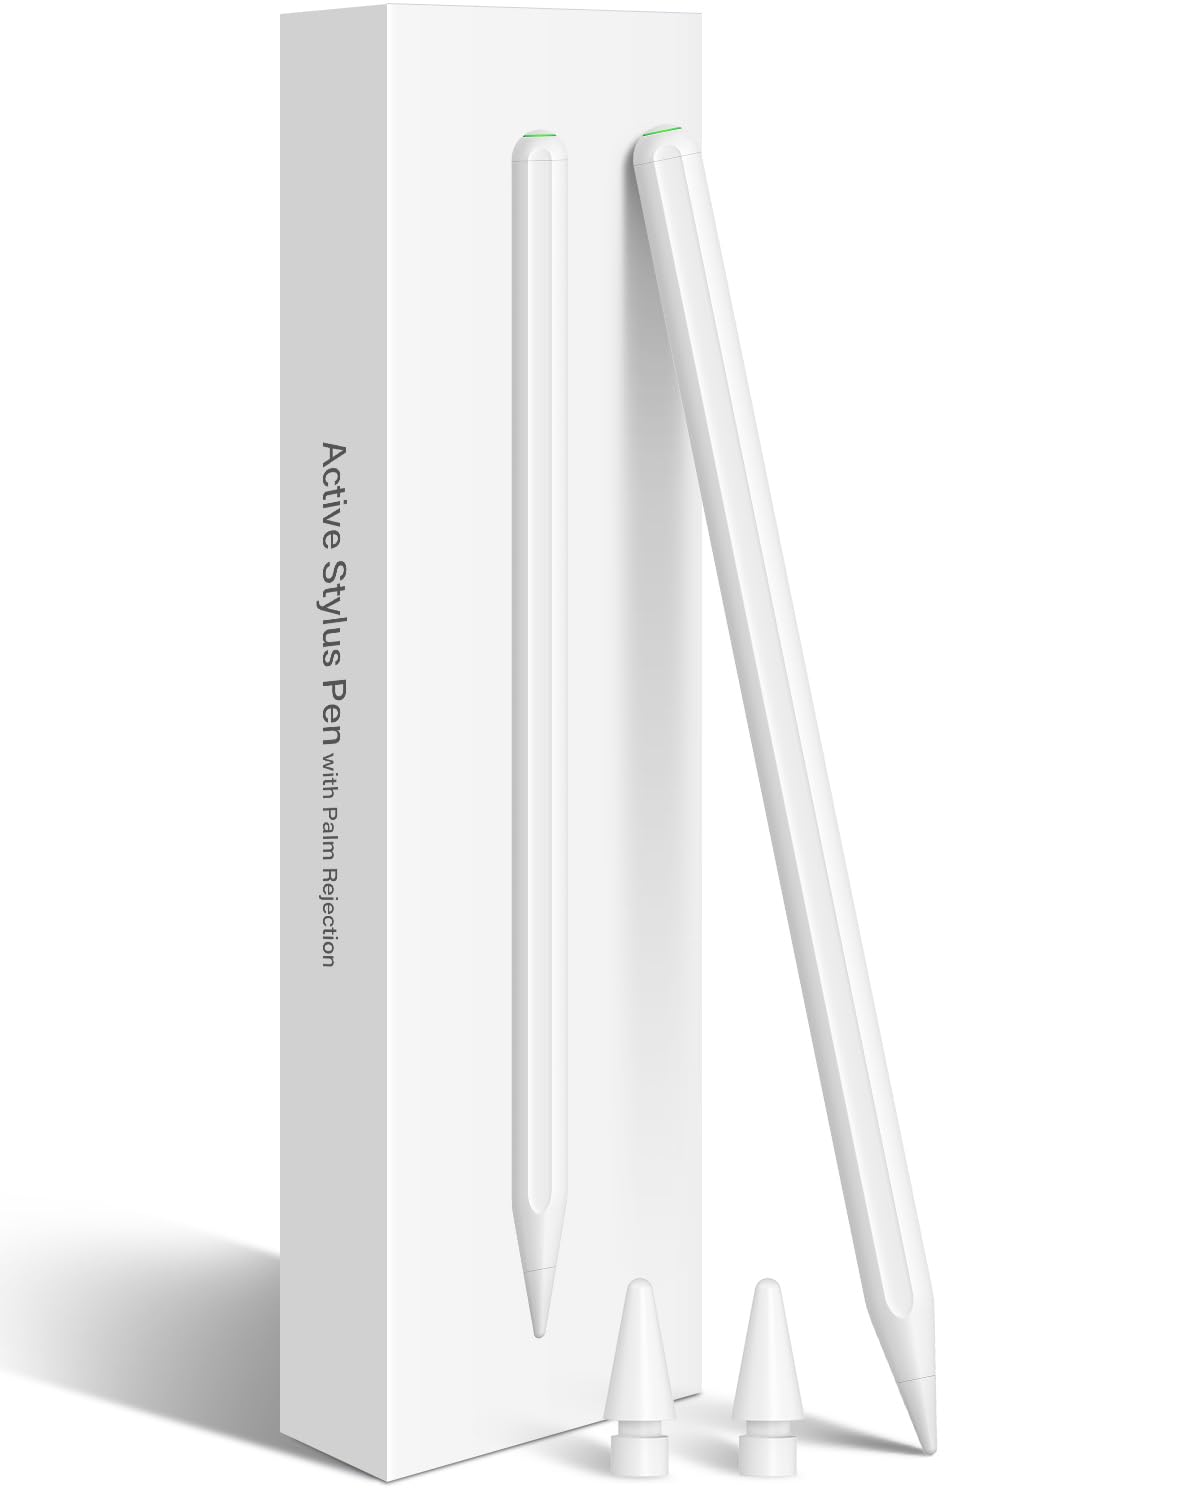 iPad Pencil 2nd Generation with Magnetic Wireless Charging and Tilt Sensitive Palm Rejection, Stylus Pen Compatible with iPad Pro 11 inch 1/2/3, iPad Pro 12.9 Inch 3/4/5, iPad Air 4/5, iPad Mini 6